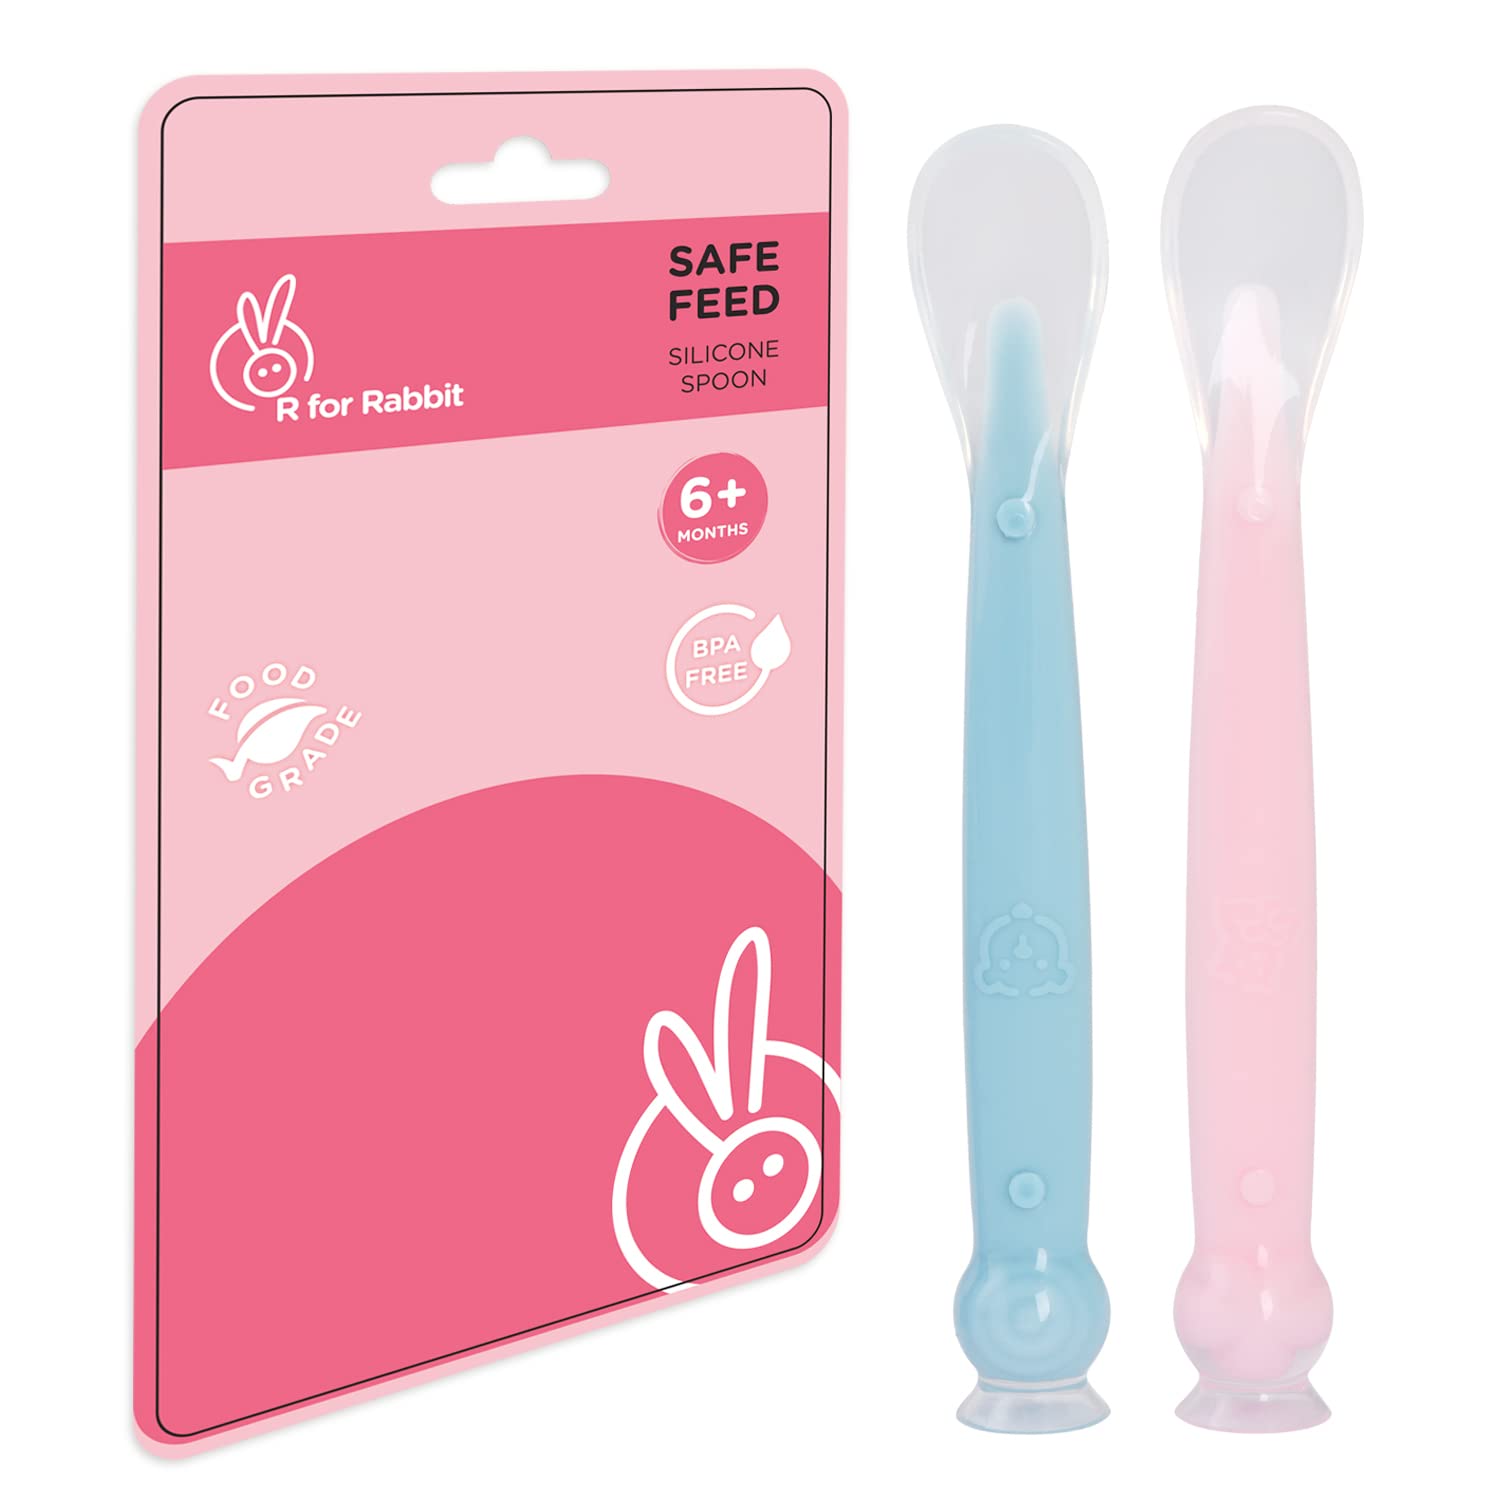 R for Rabbit Safe Feed Silicone Baby Spoon Set